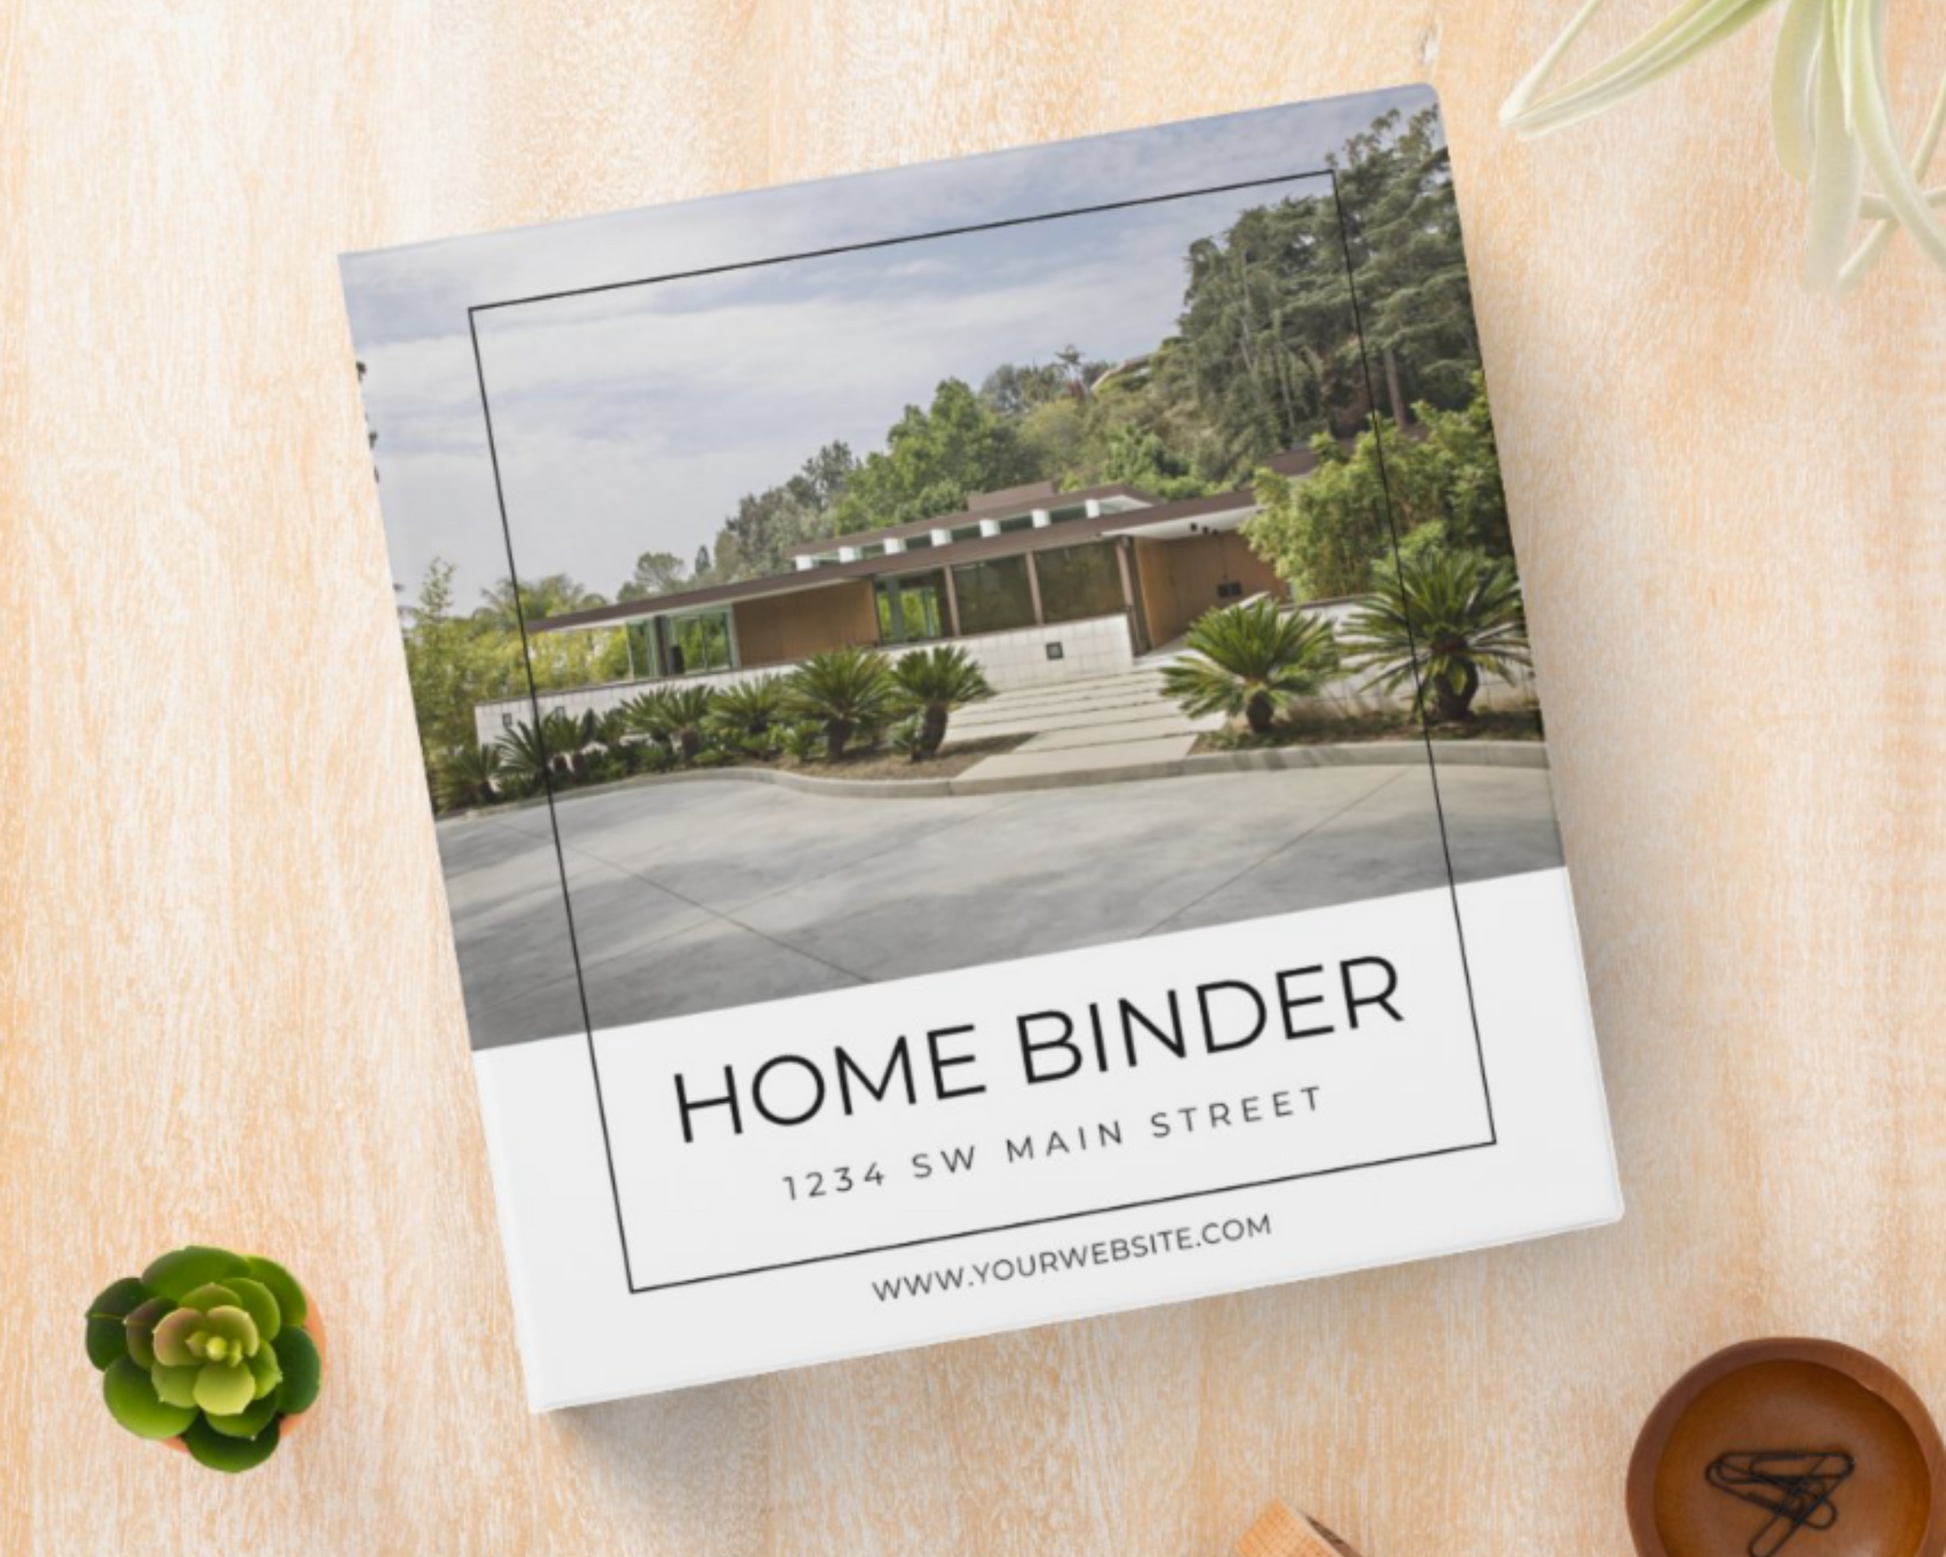 Real Estate Client Closing Packet, New Home Binder, Buyer Packet, Real Estate Marketing, Real Estate Flyer, Home Buyer Guide, Canva Template